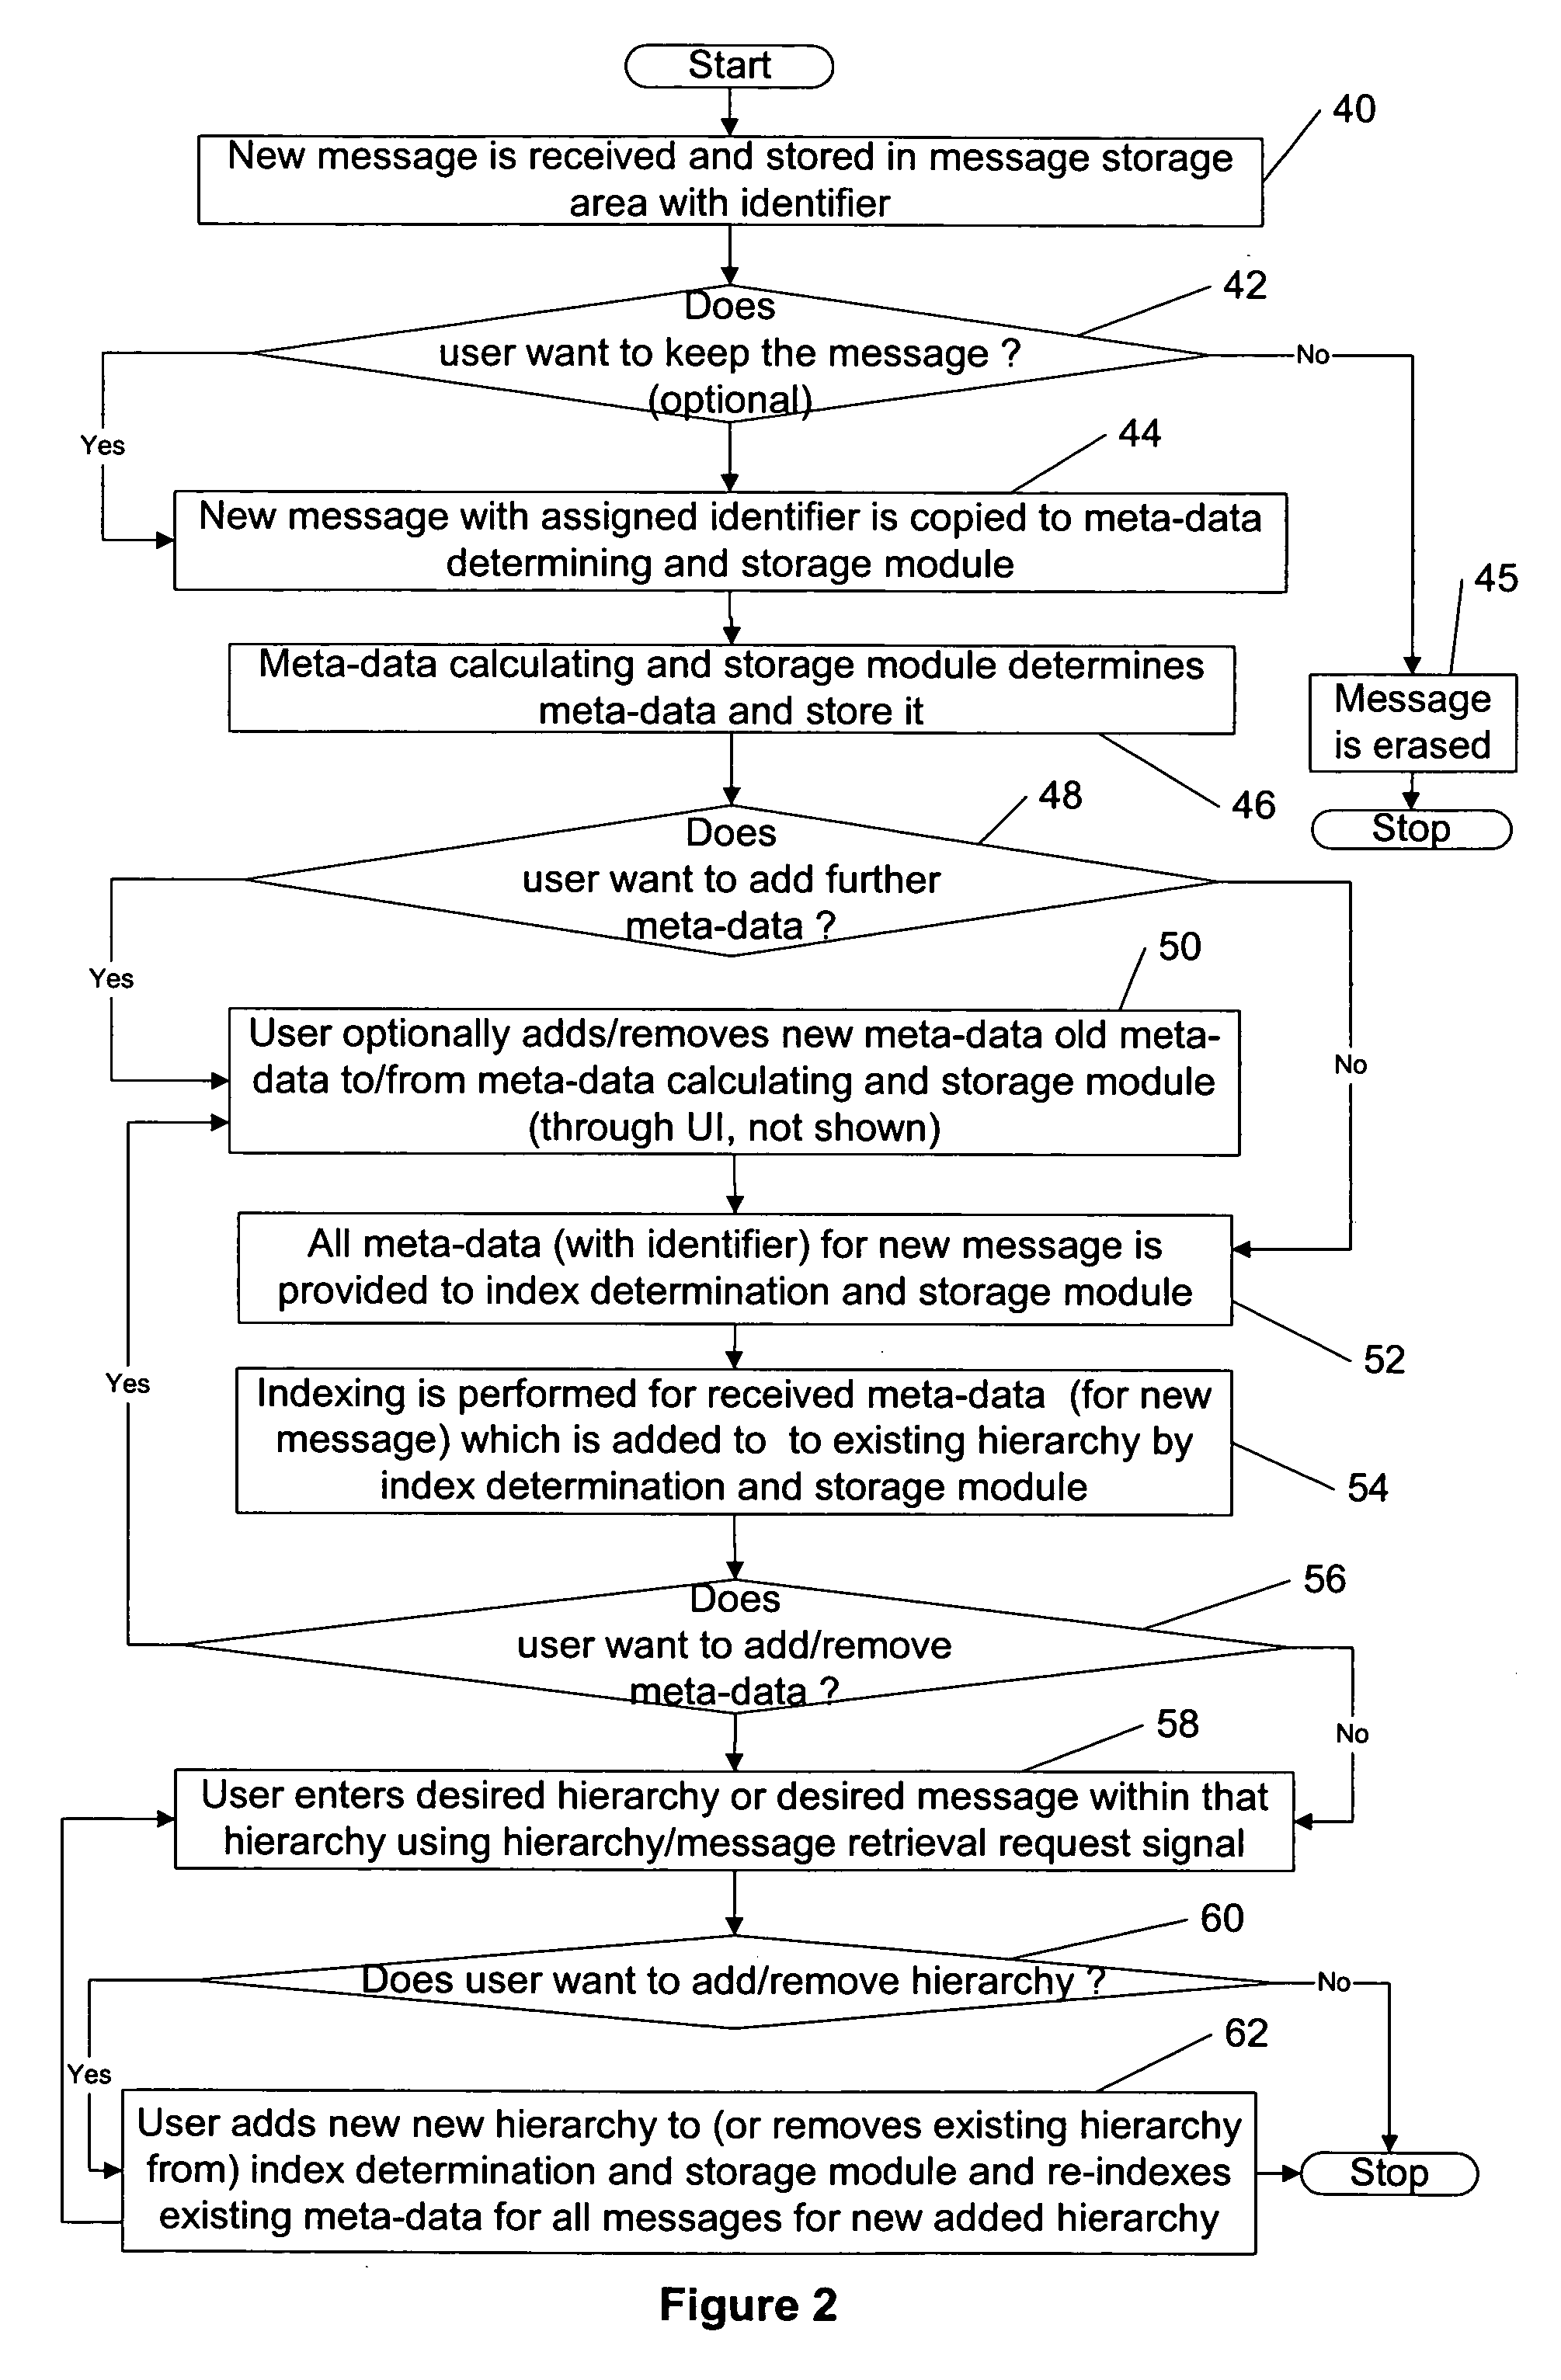 Meta-data approach to indexing, retrieval and management of stored messages in a portable communication device